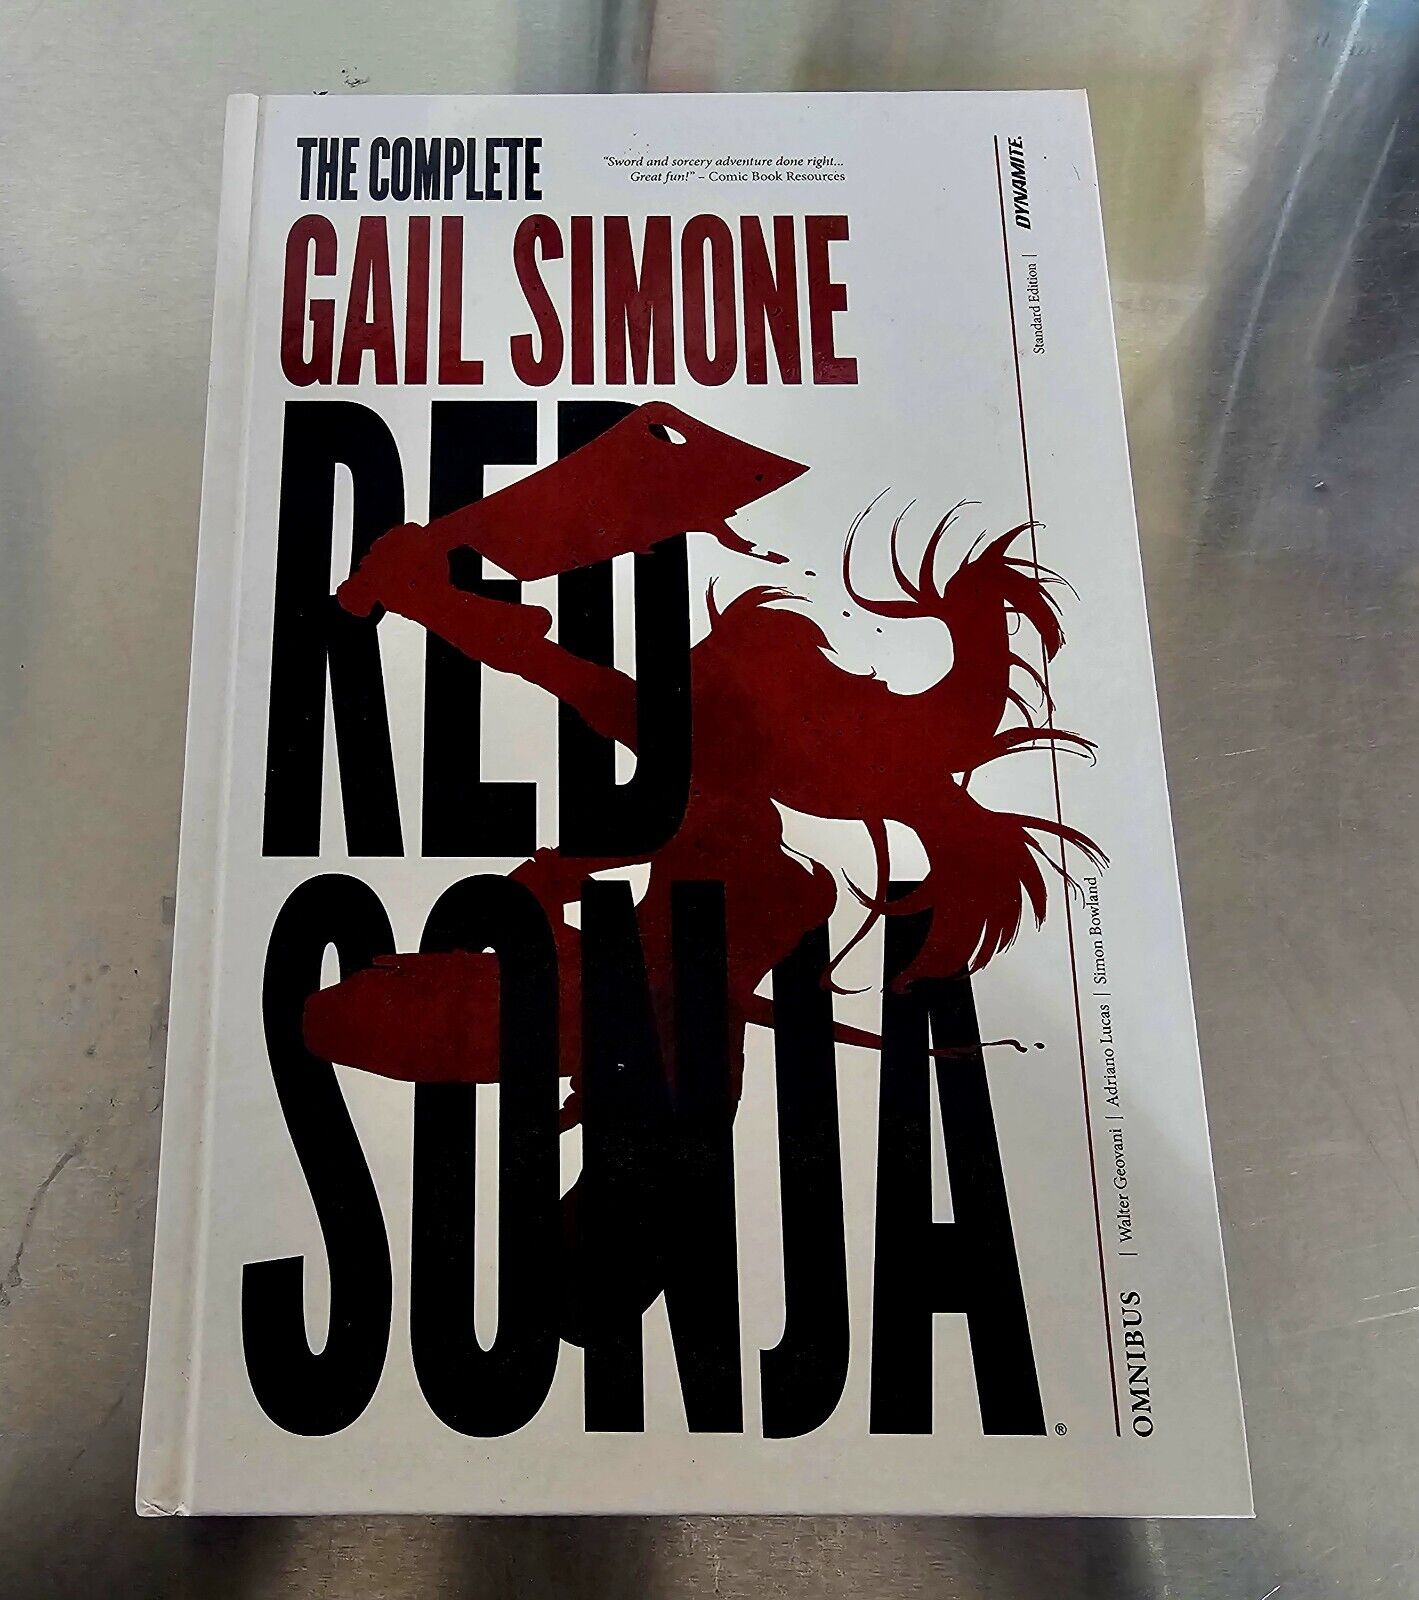 The Complete Gail Simone Red Sonja Oversized Ed. Hc by Gail Simone: New